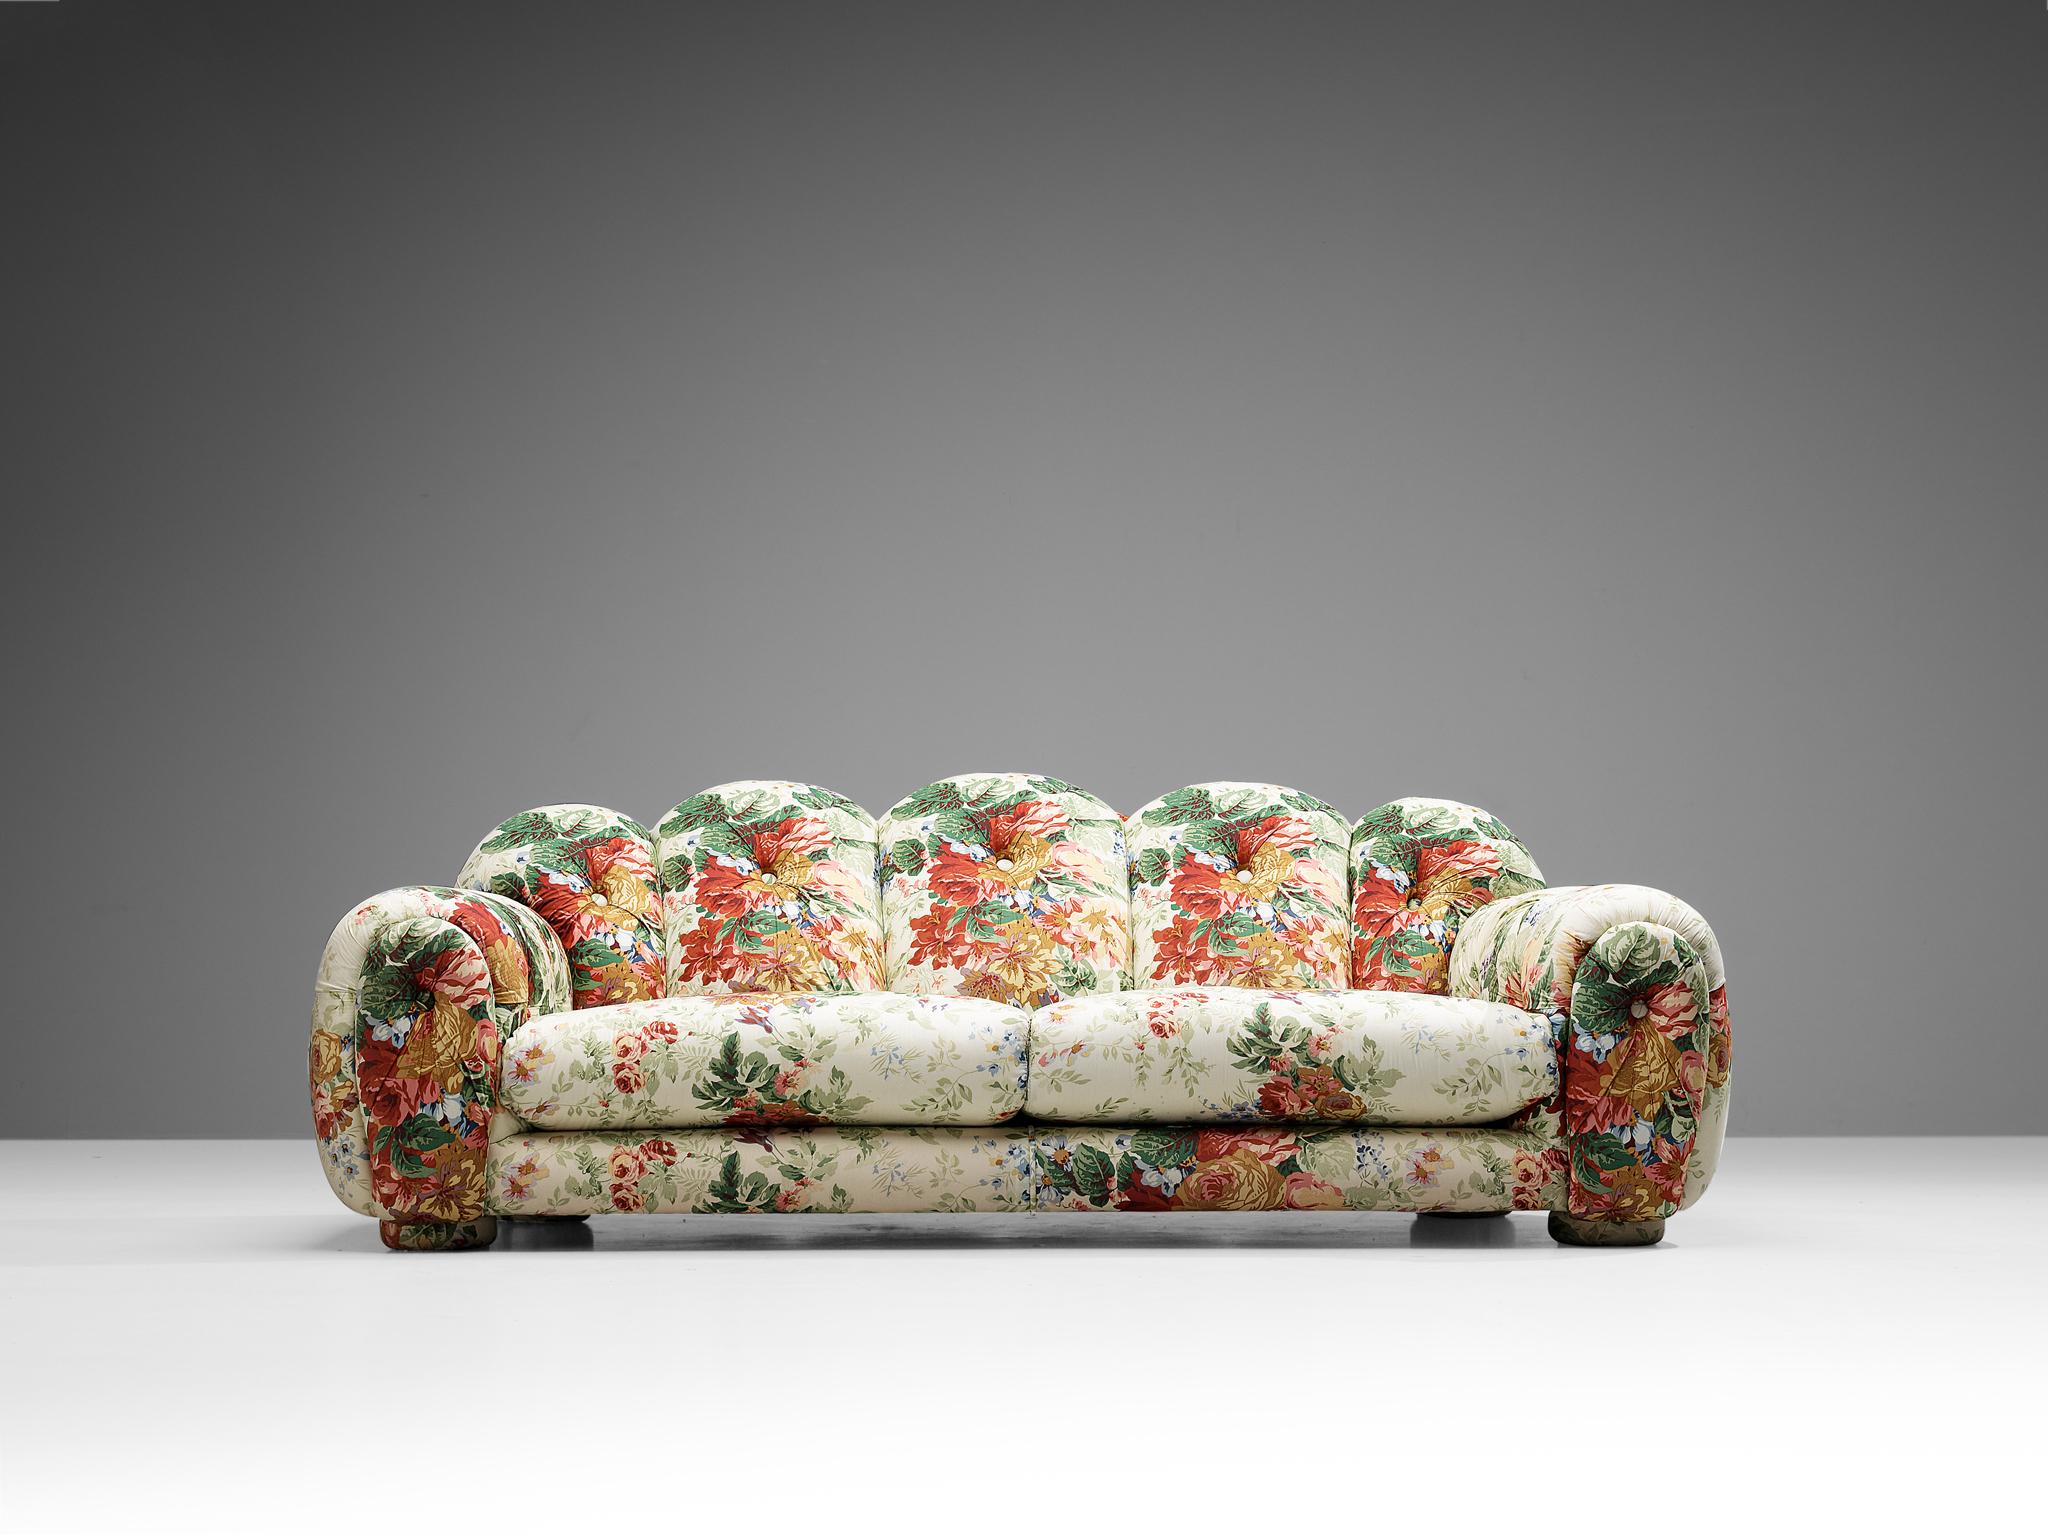 This vibrant and bulky sofa was manufactured in Italy in the 1970s. This item is upholstered in a multi tone tufted floral fabric. The smooth and bulky form, combined with the floral upholstery, creates a cheerful and cloud-like appearance. This